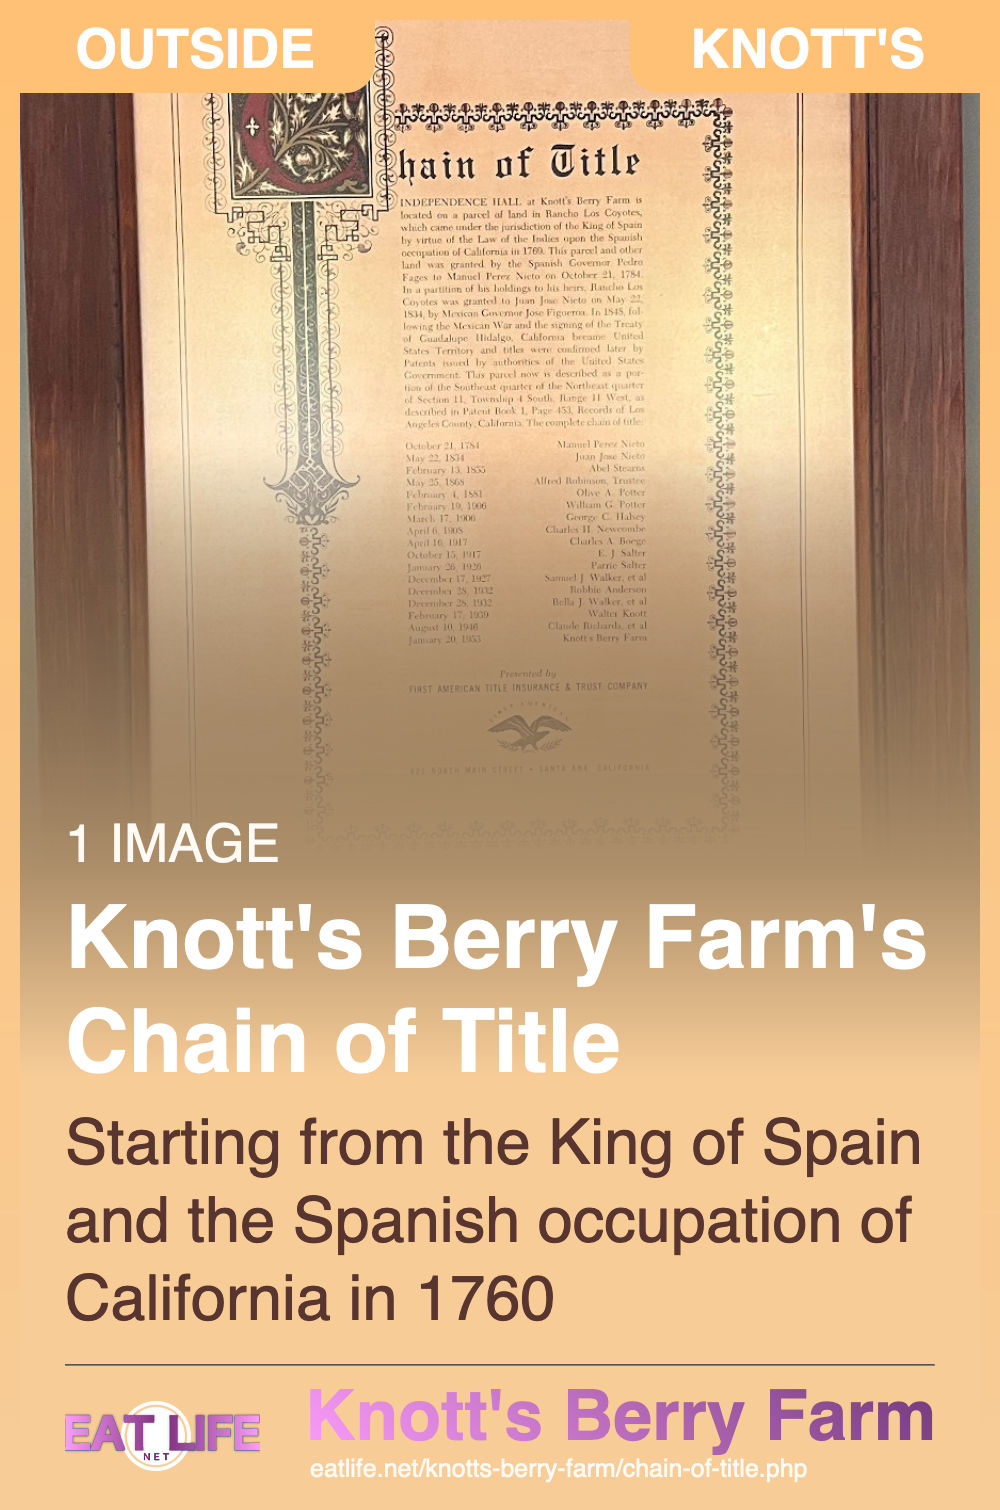 Knott's Chain of Title